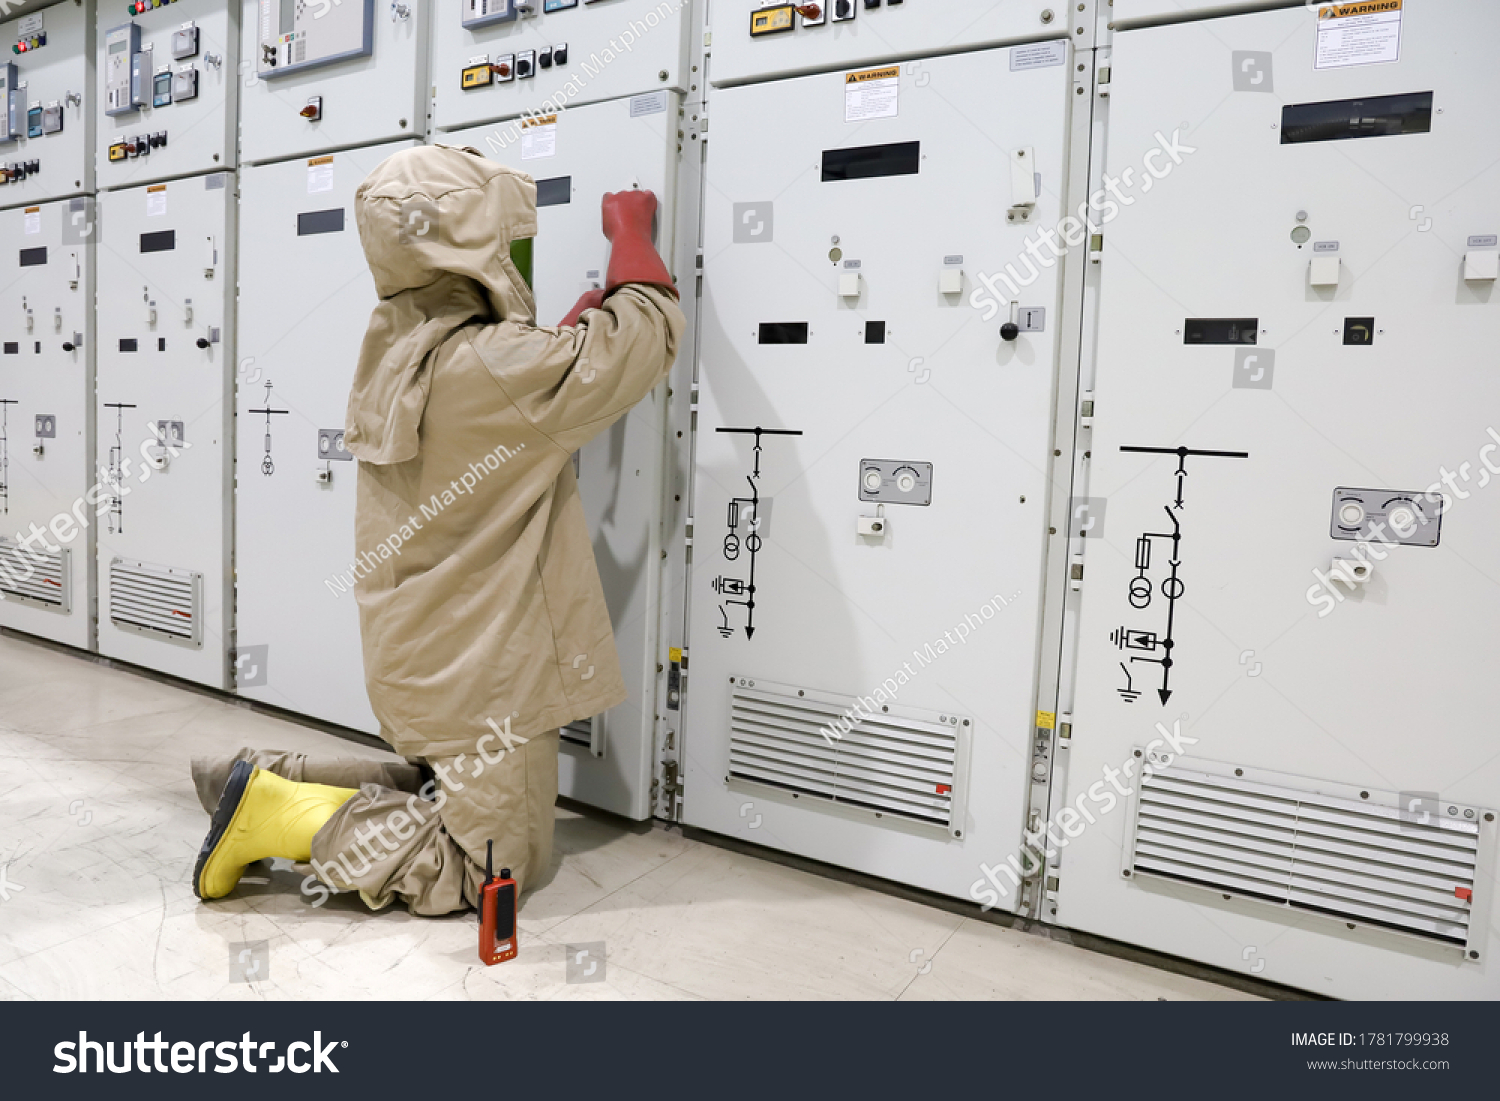 The electrician wear arc flash suit, electrical safety gloves and high voltage insulating boots to open power compartment door for rackout circuit breaker of medium voltage switchgear #1781799938